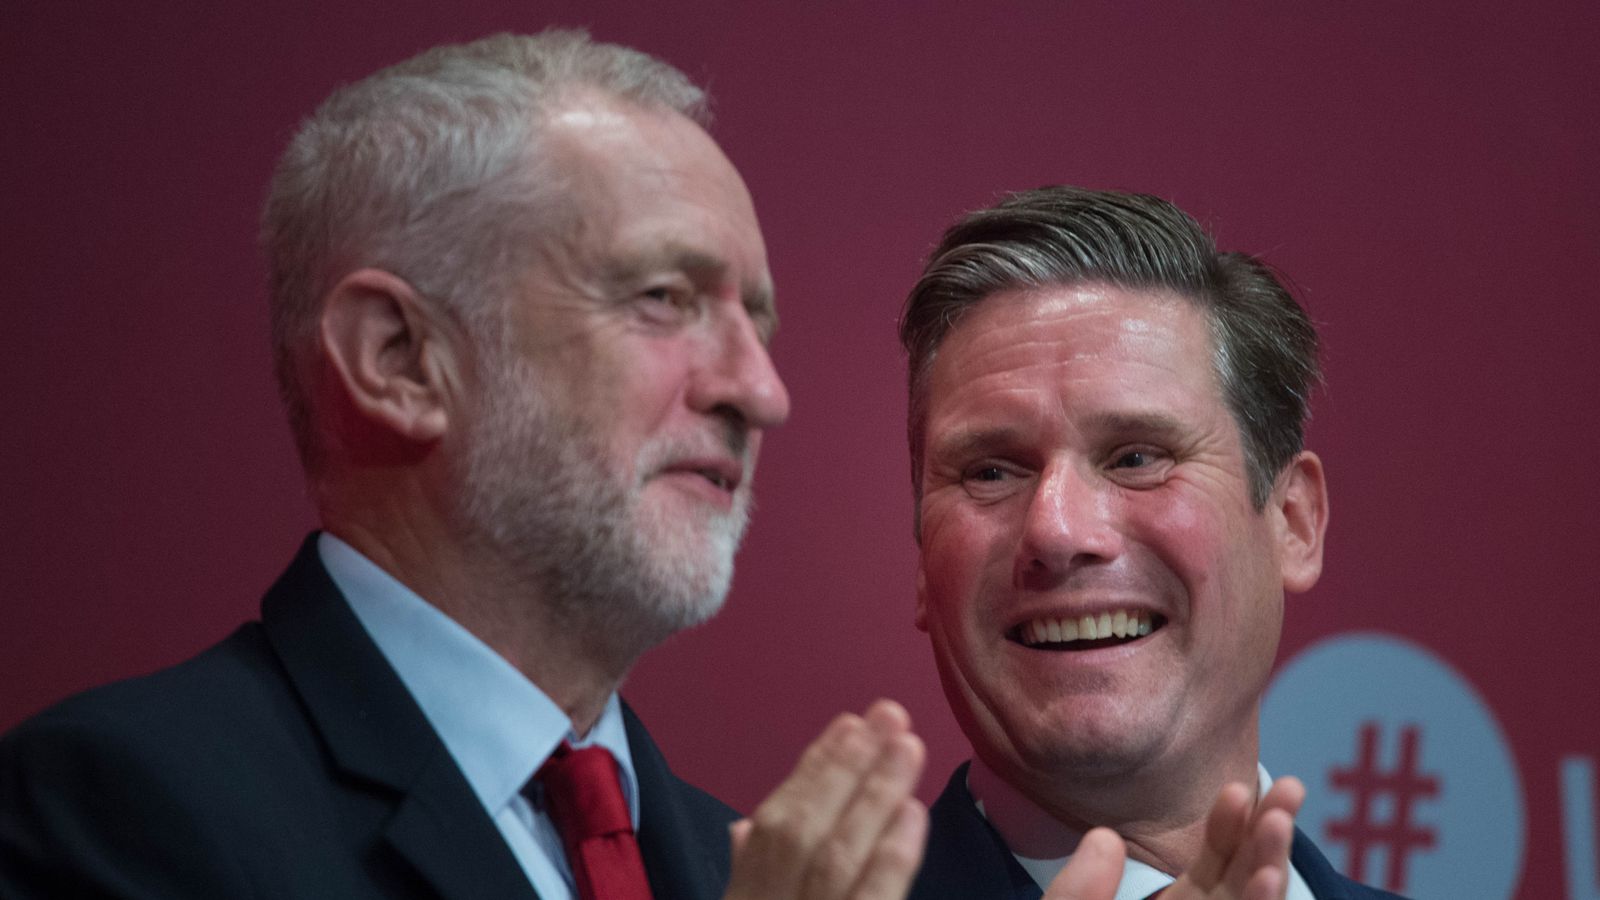 Sir Keir Starmer faces renewed calls to let Jeremy Corbyn stand as Labour candidate at next election 